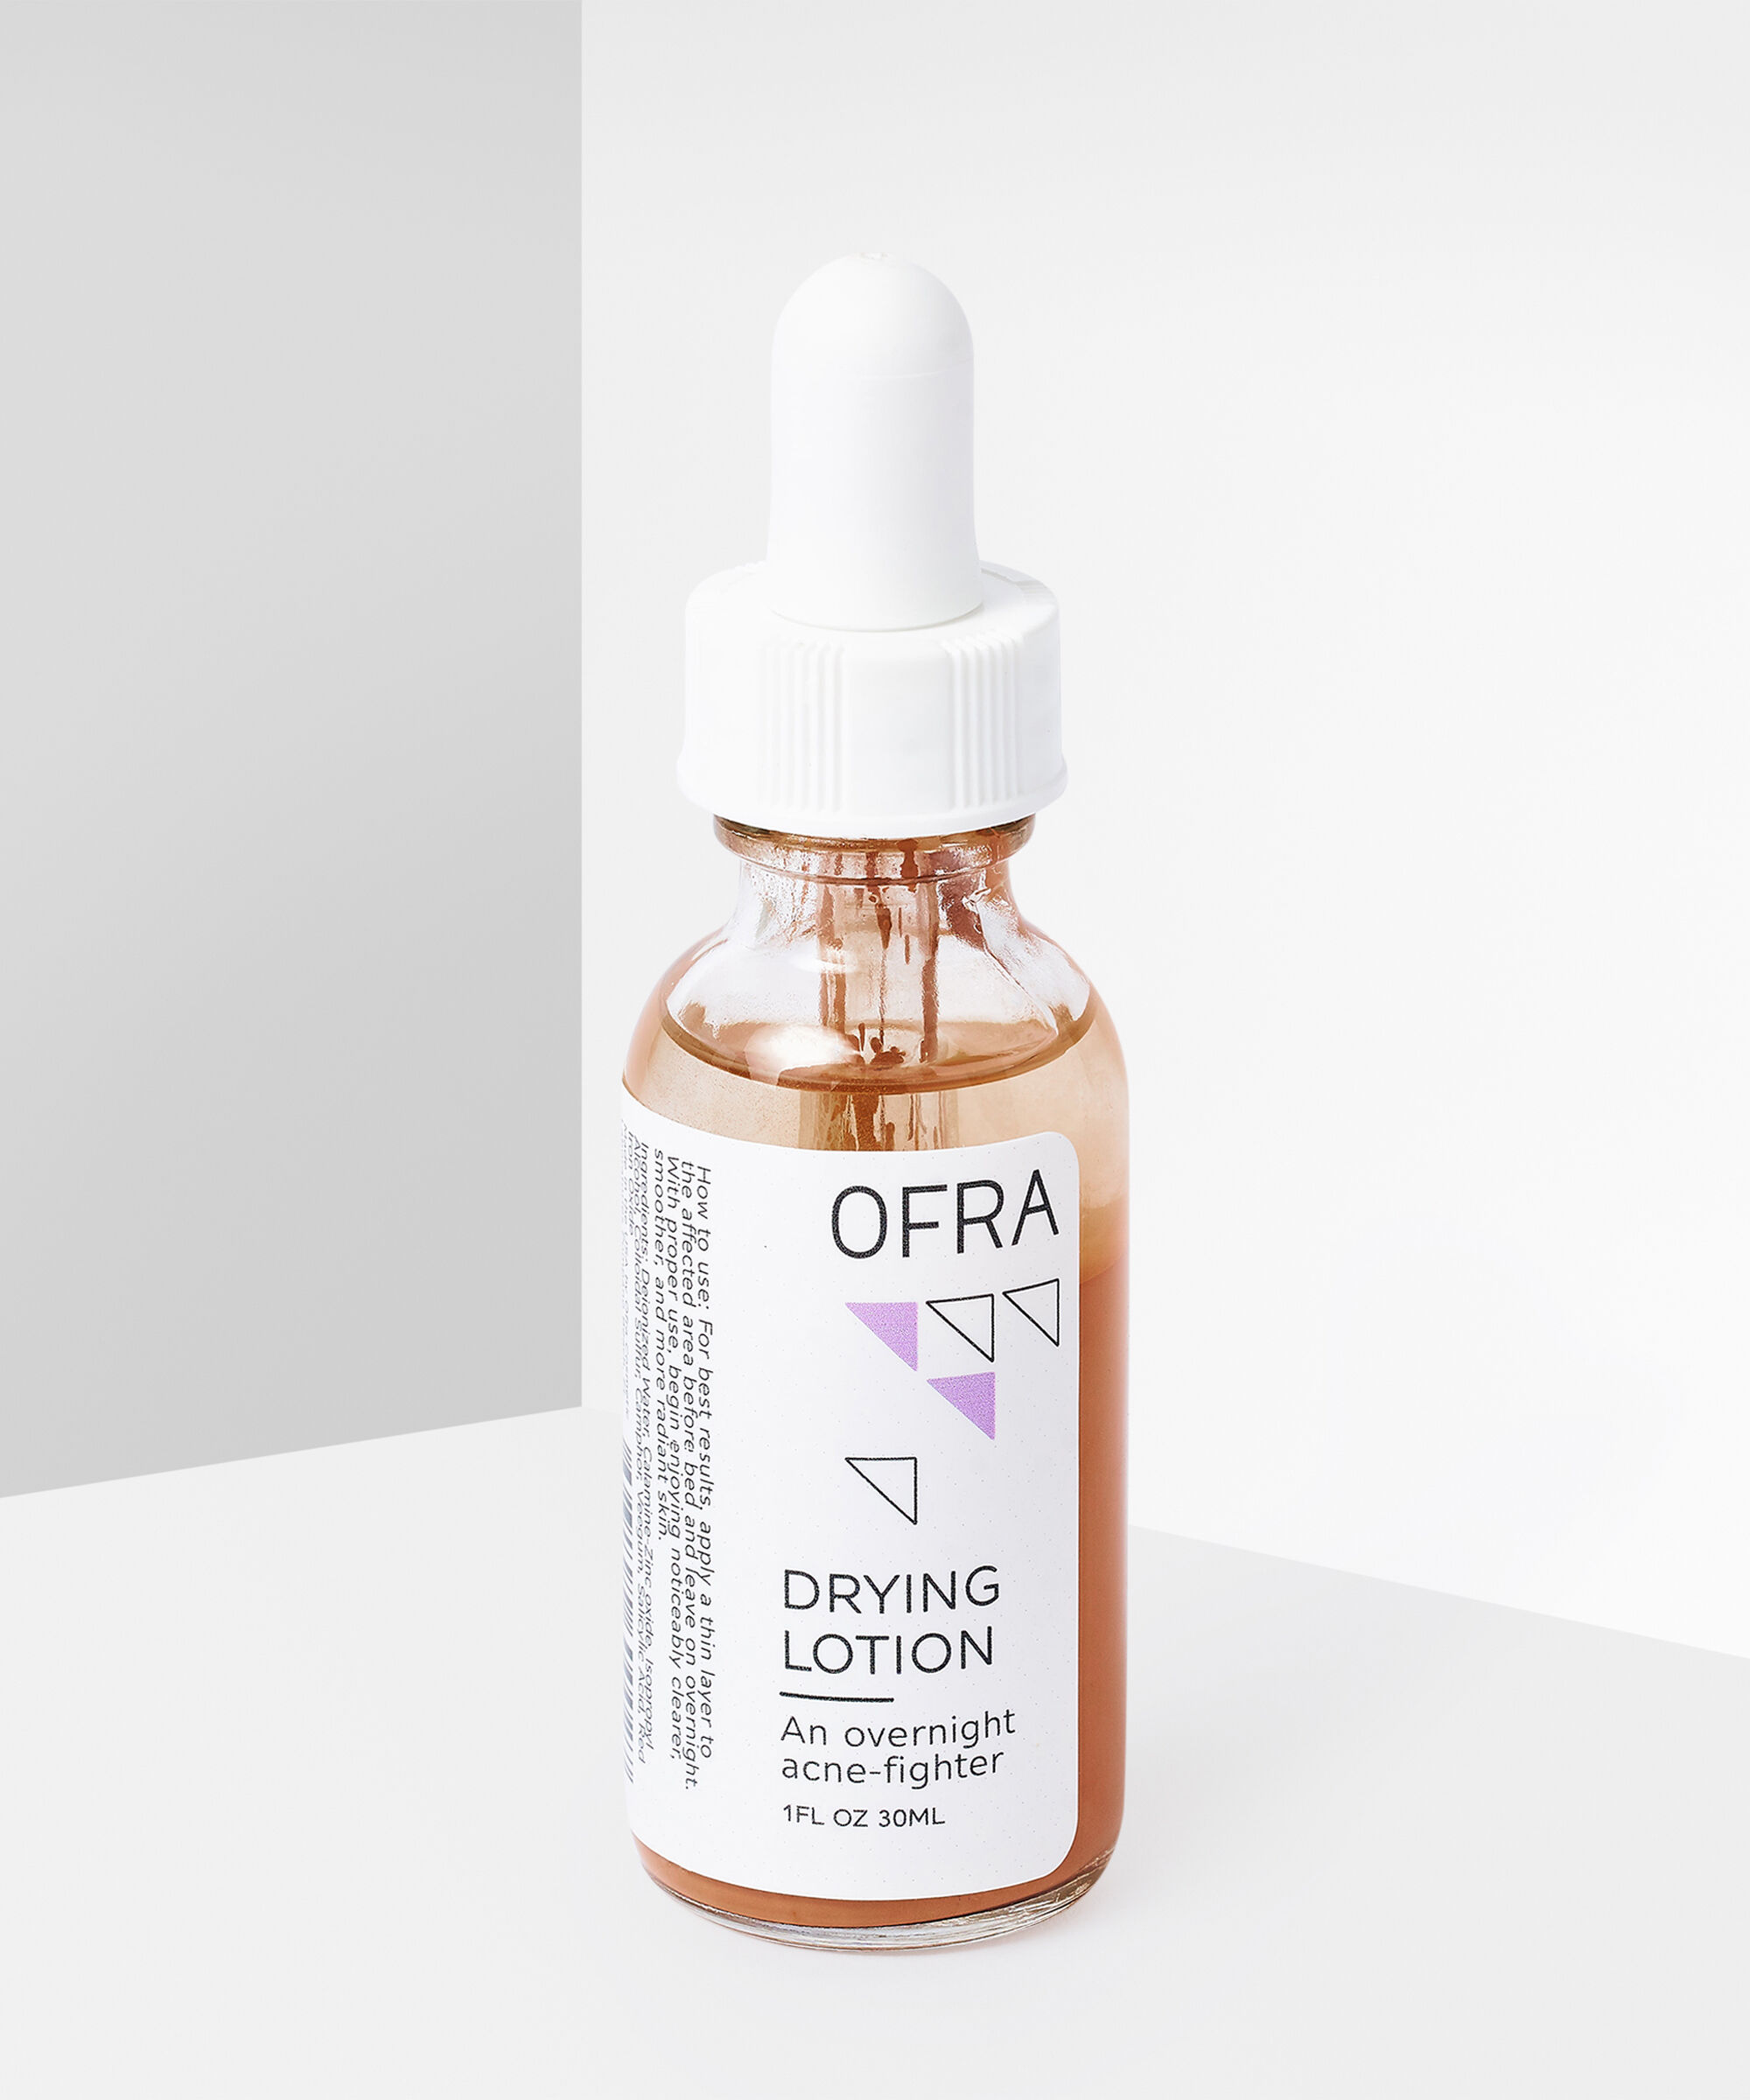 OFRA - Drying Lotion